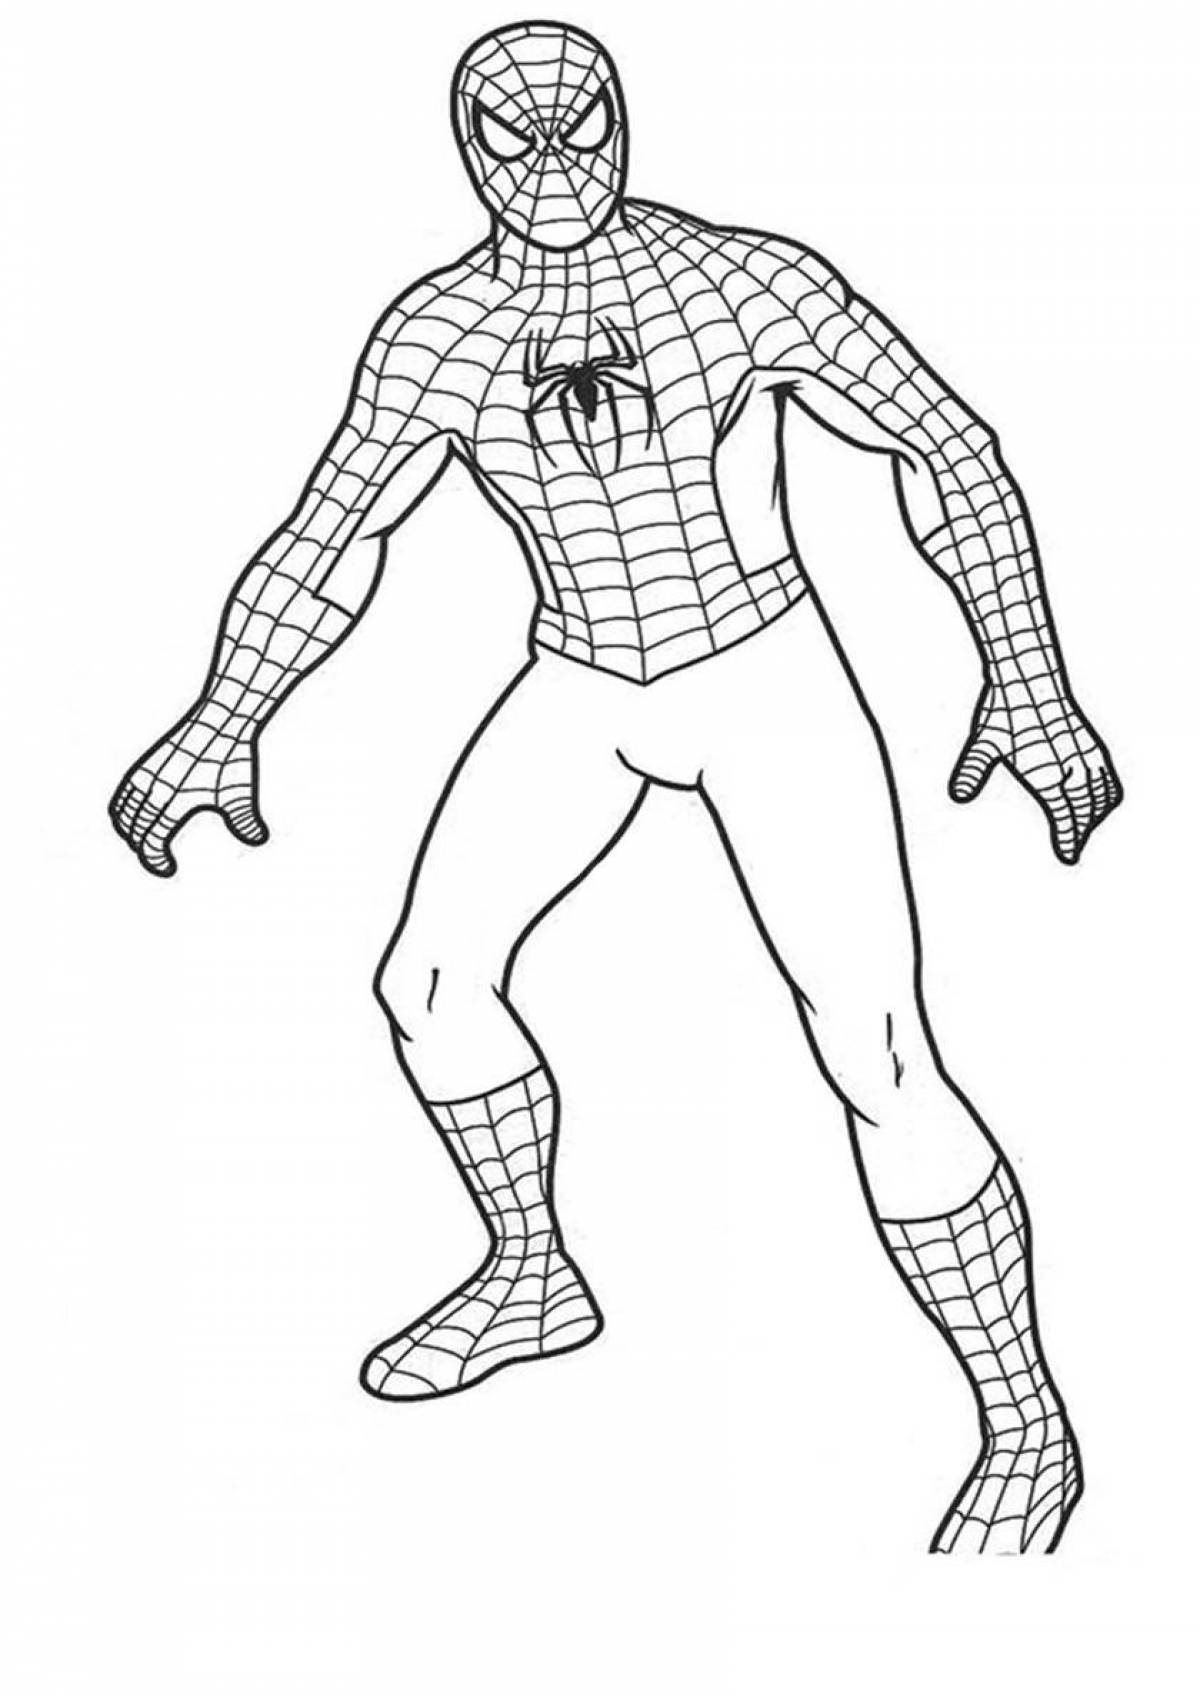 Incredible Spiderman coloring book for boys